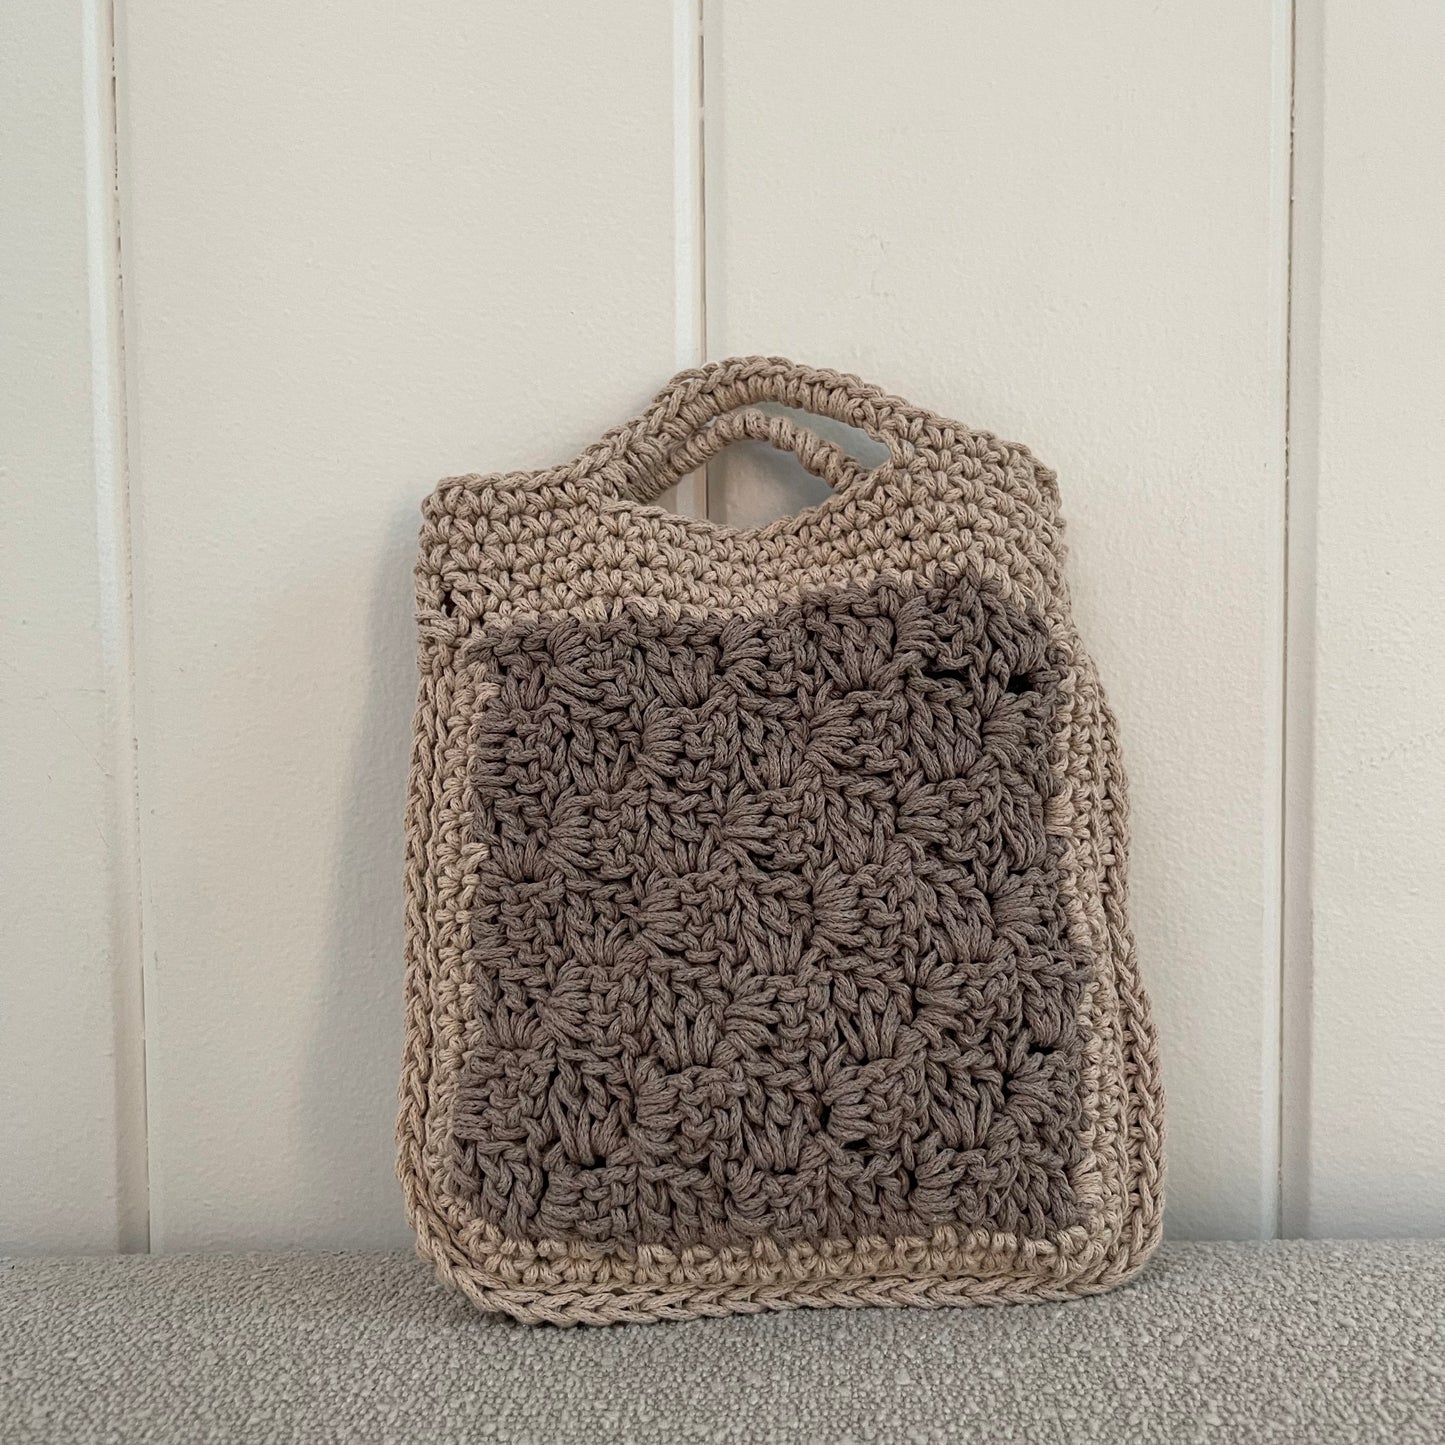 The backside of a crocheted granny square handbag in tan and grey. 